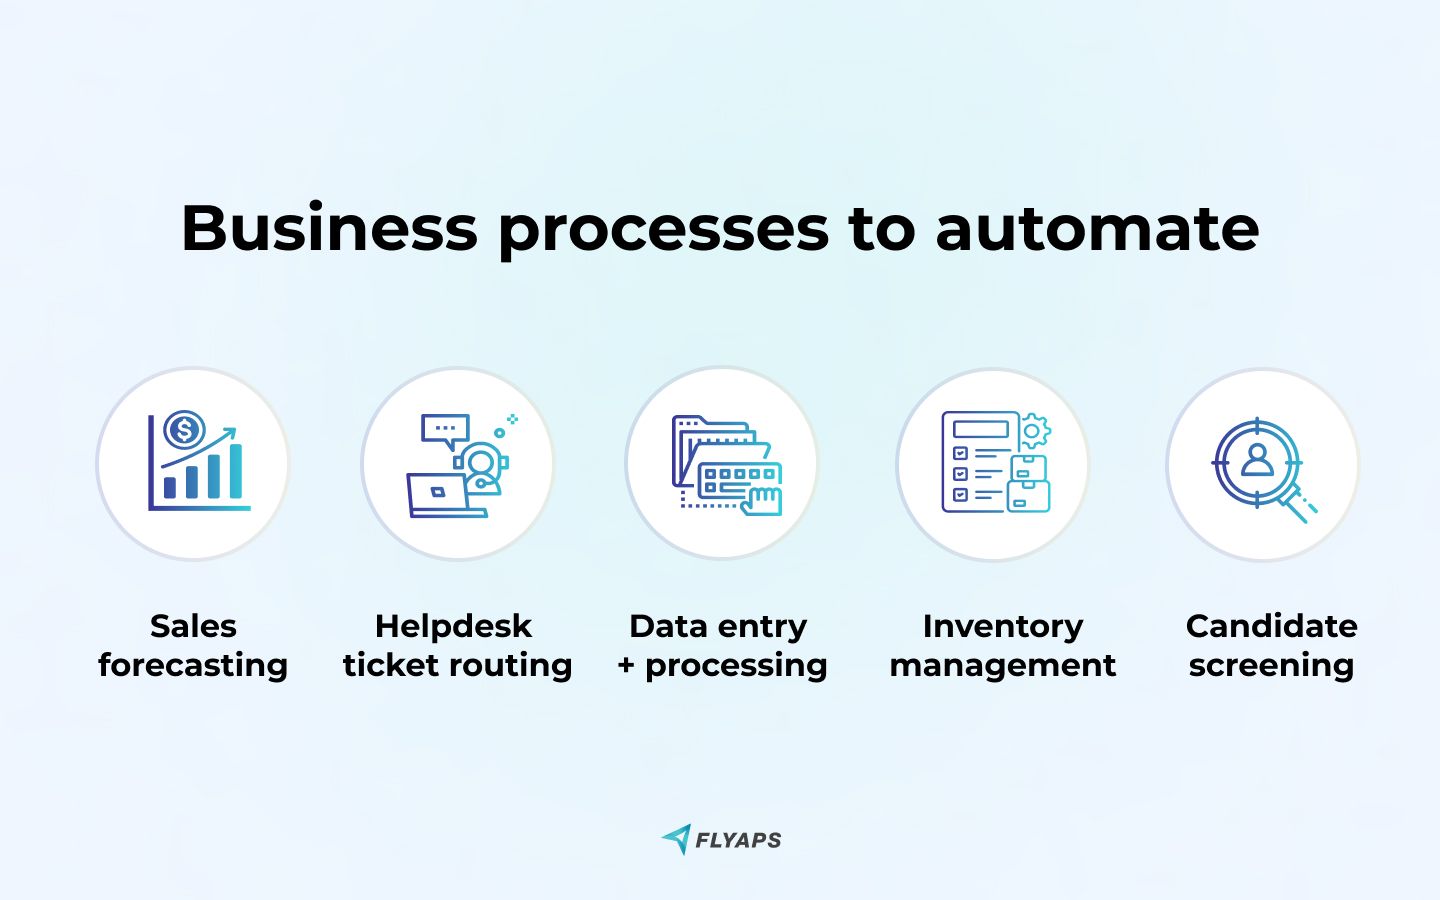 Examples of business processes to automate